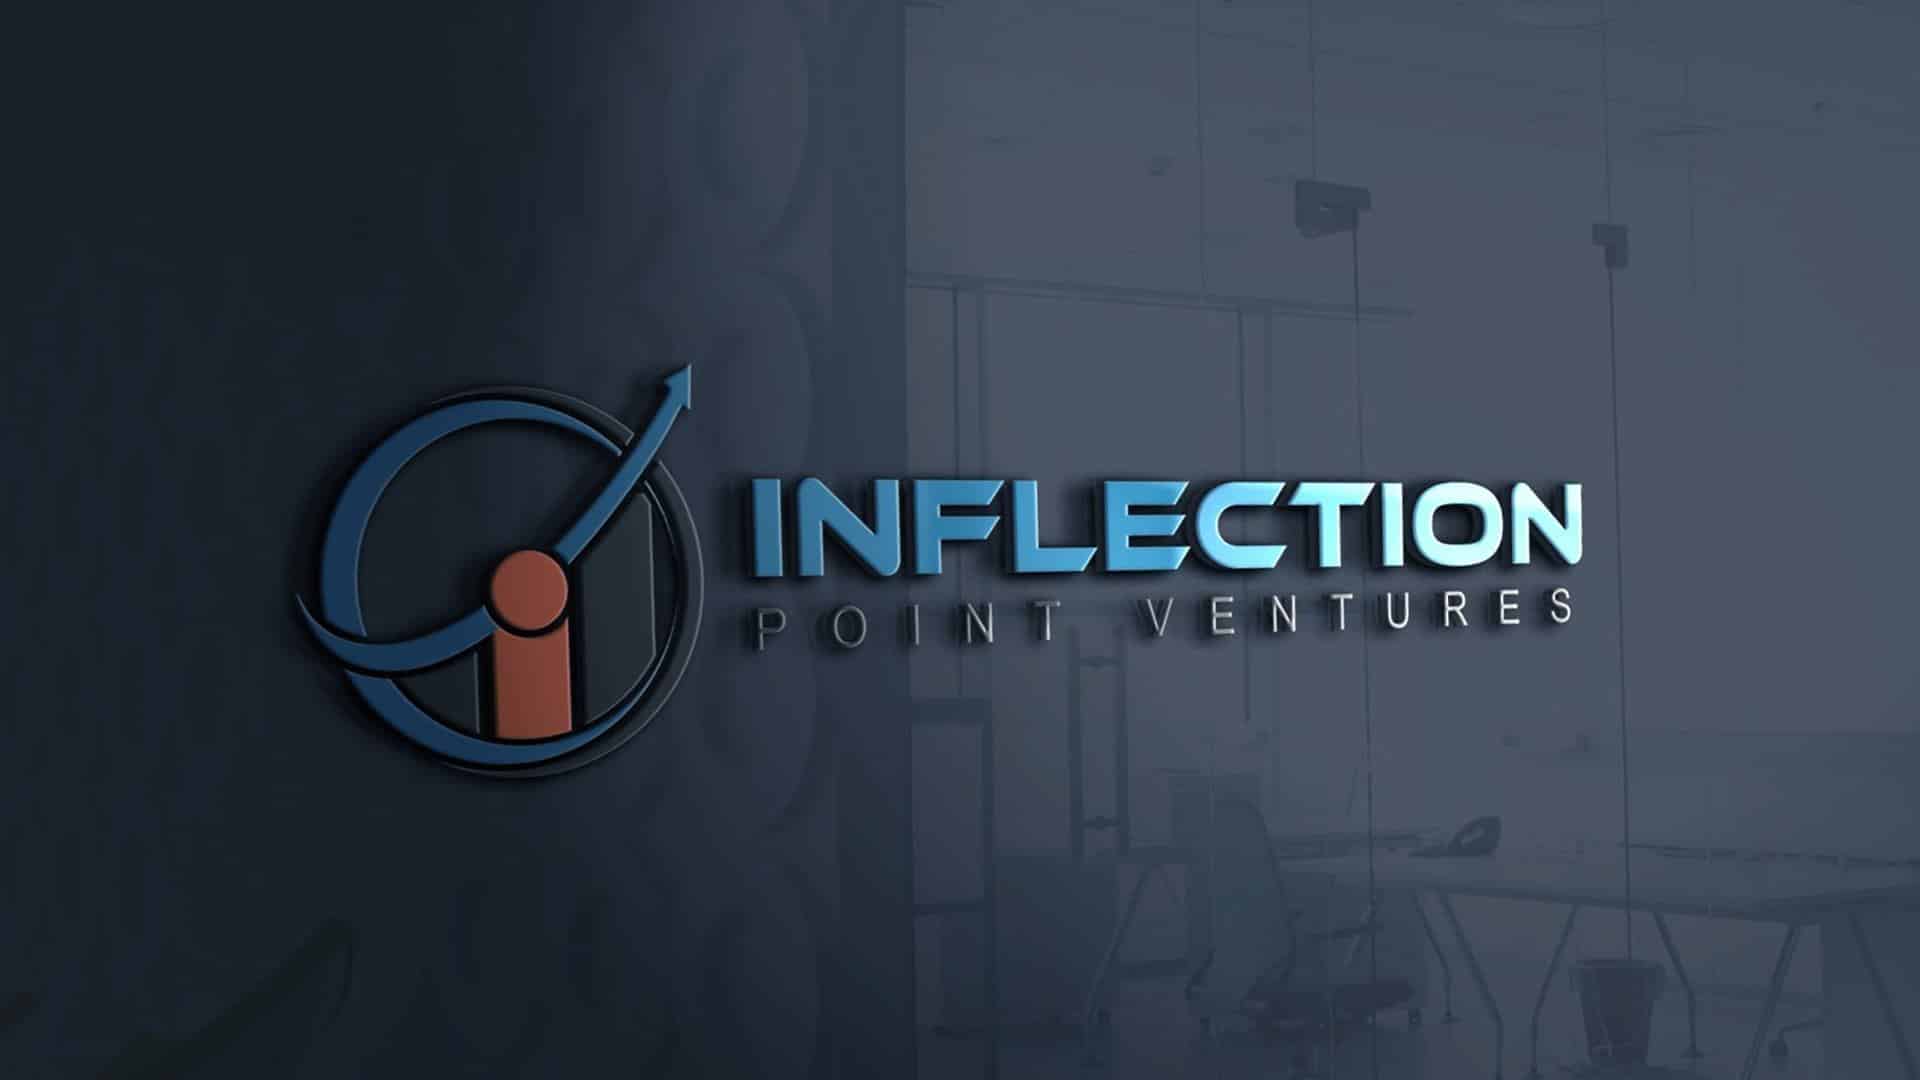 Inflection Point returns 190 per cent in 13 exits in 2021